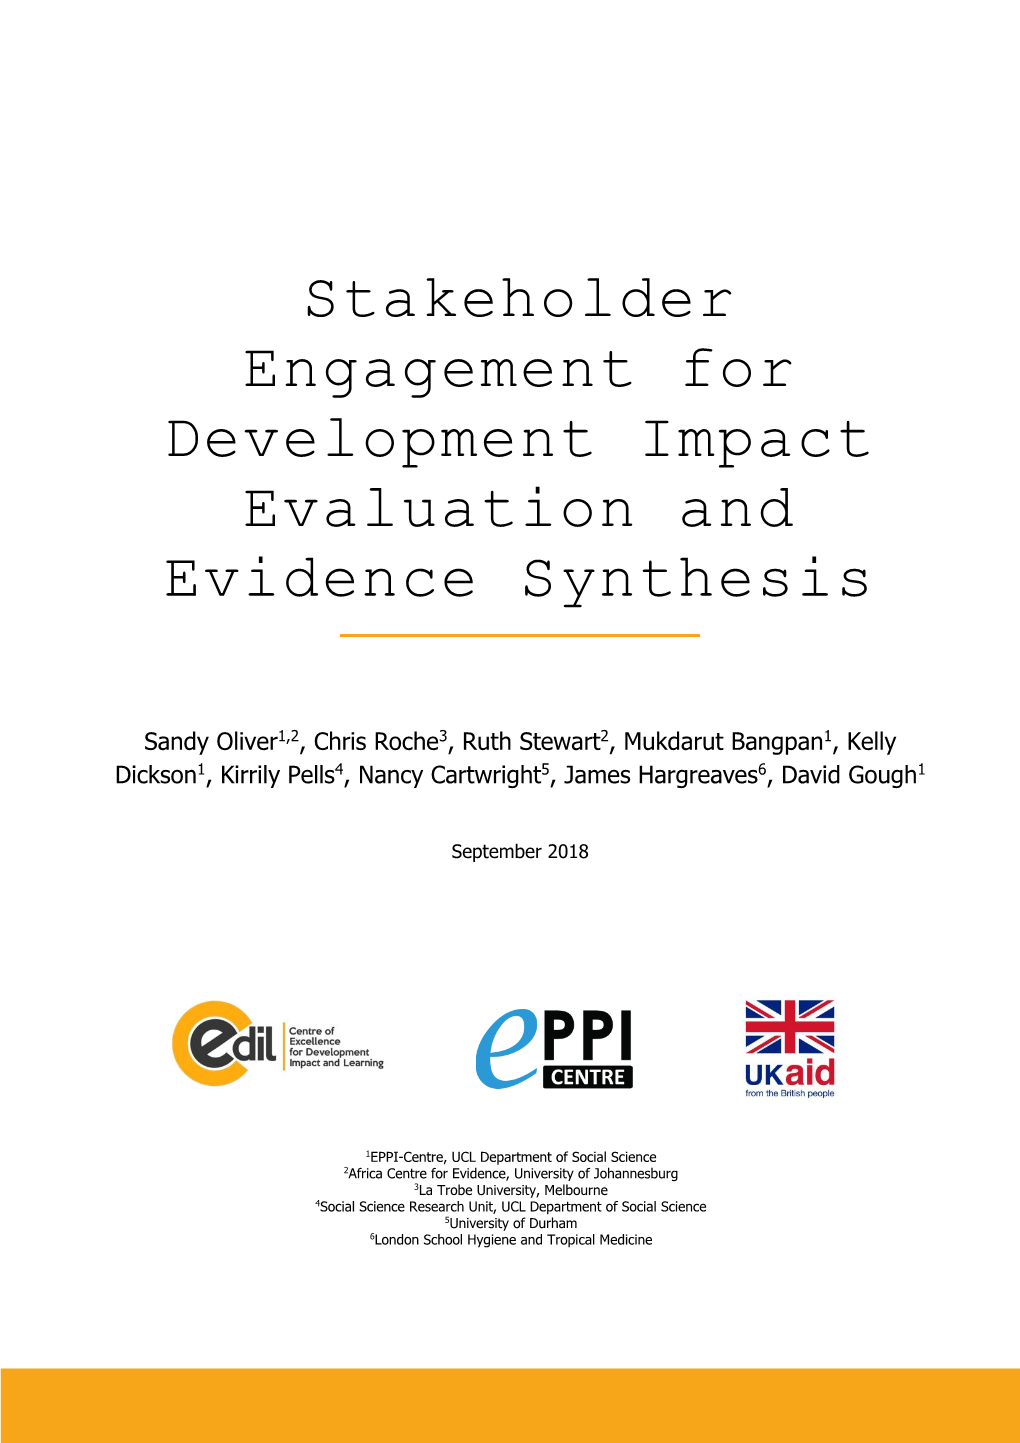 Stakeholder Engagement for Development Impact Evaluation and Evidence Synthesis CEDIL Inception Paper 3: London